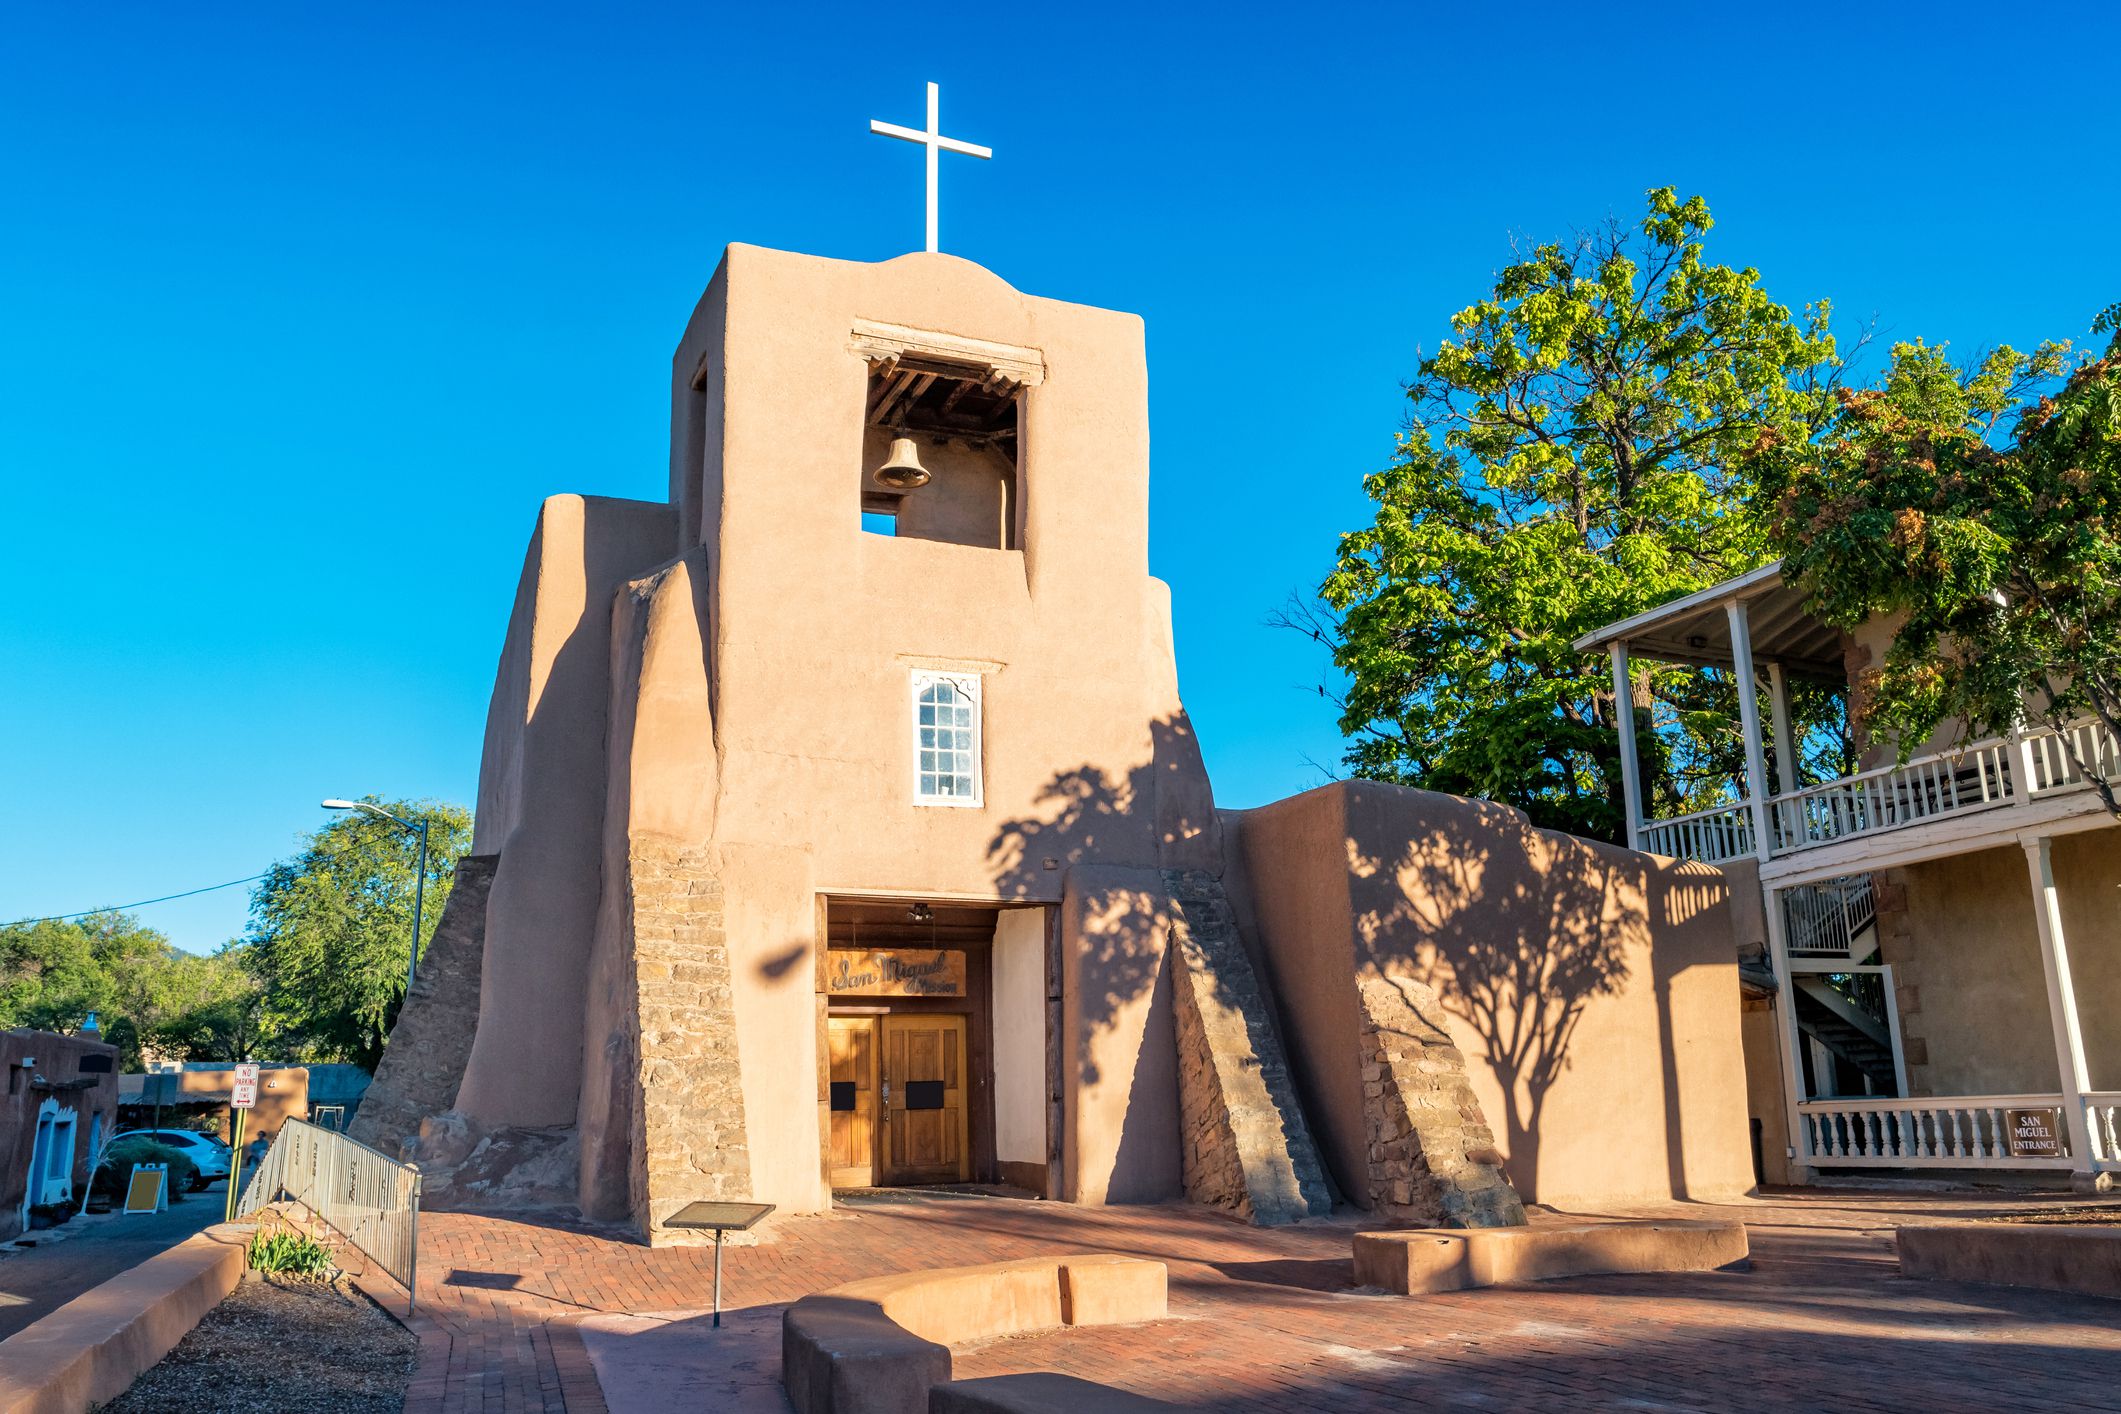 <p>With its warm, dry climate and copious outdoor adventures, rich cultural history, and vibrant arts and culture scene, it's no wonder Santa Fe — the oldest state capital in the U.S. — is such a hit with the 50+ crowd. Single travelers can immerse themselves in the community by visiting the <a href="https://santafe.org/Visiting_Santa_Fe/Neighborhoods/Plaza_and_Downtown/index.html">historic plaza</a>, which dates back to the early 1600s and continues to host a wide range of events — from markets to concerts. History buffs can tour the San Miguel Mission, various museums focused on the region’s Native American traditions, and the nearby Puye Cliff Dwellings, once home to more than a thousand Pueblo people. The Spanish Colonial adobe city in the foothills of the Sangre de Cristo Mountains is also more saturated with art galleries and museums than almost anywhere else in the world — all within walking distance or a short drive from the town square.</p>